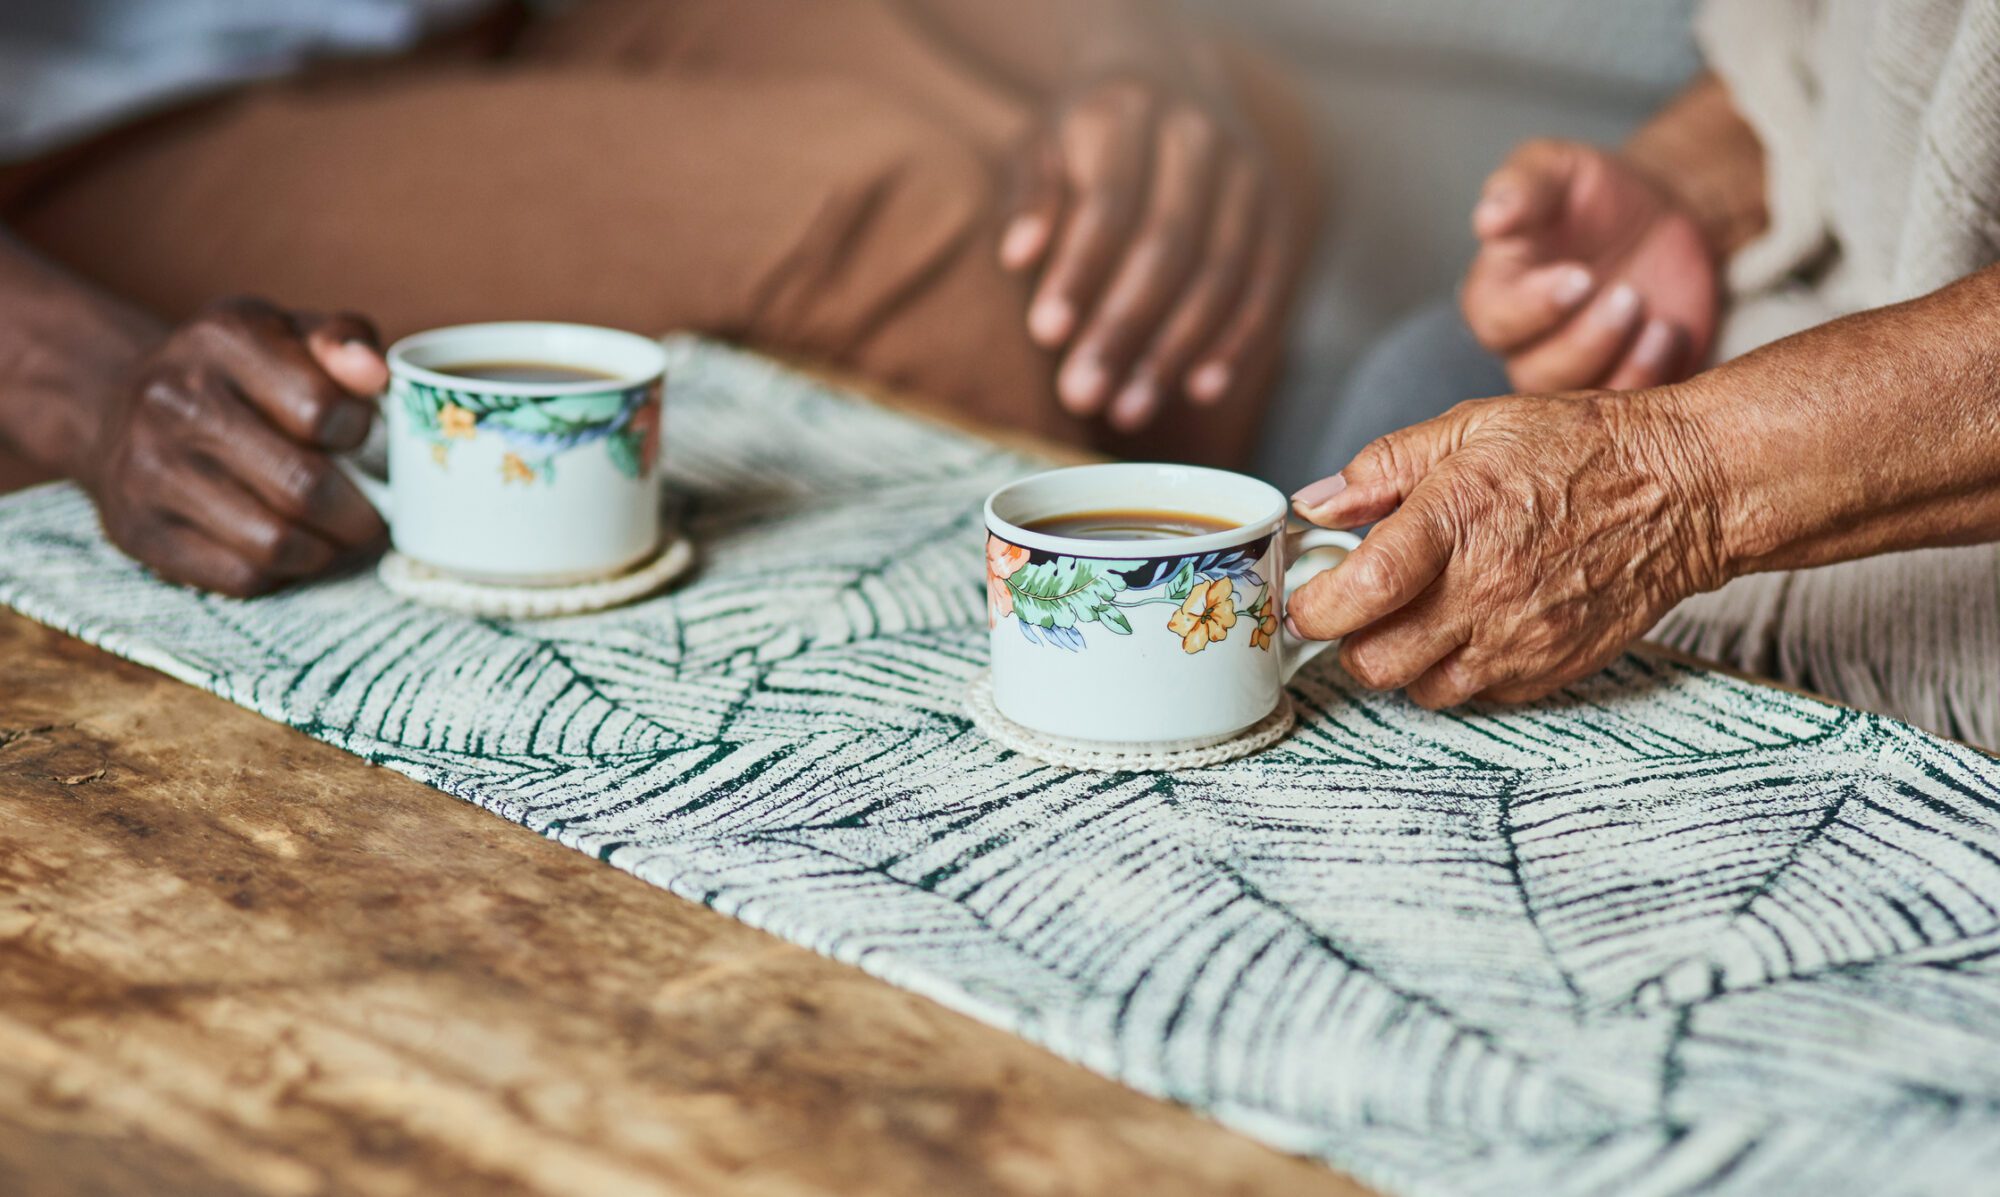 Shot of two unrecognizable elderly people sharing a cup of coffee